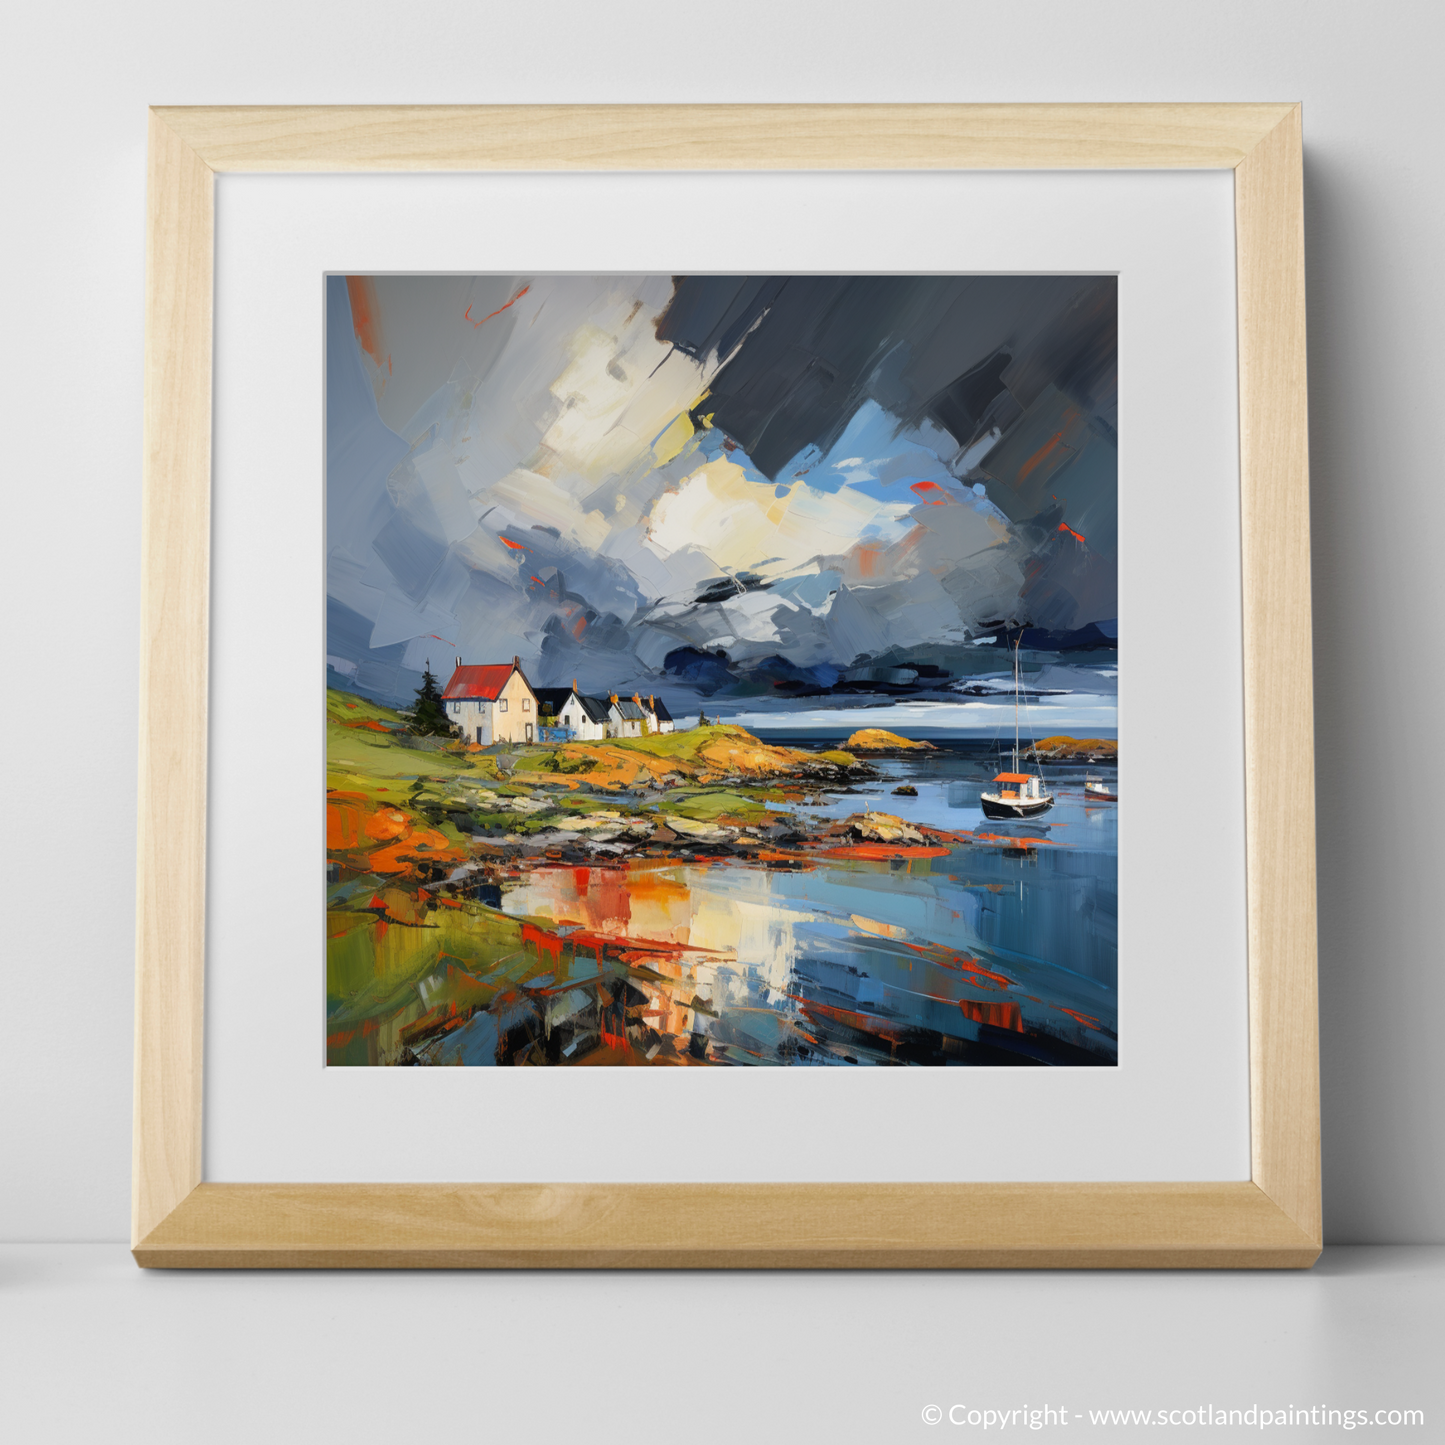 Art Print of Gairloch Harbour with a stormy sky with a natural frame